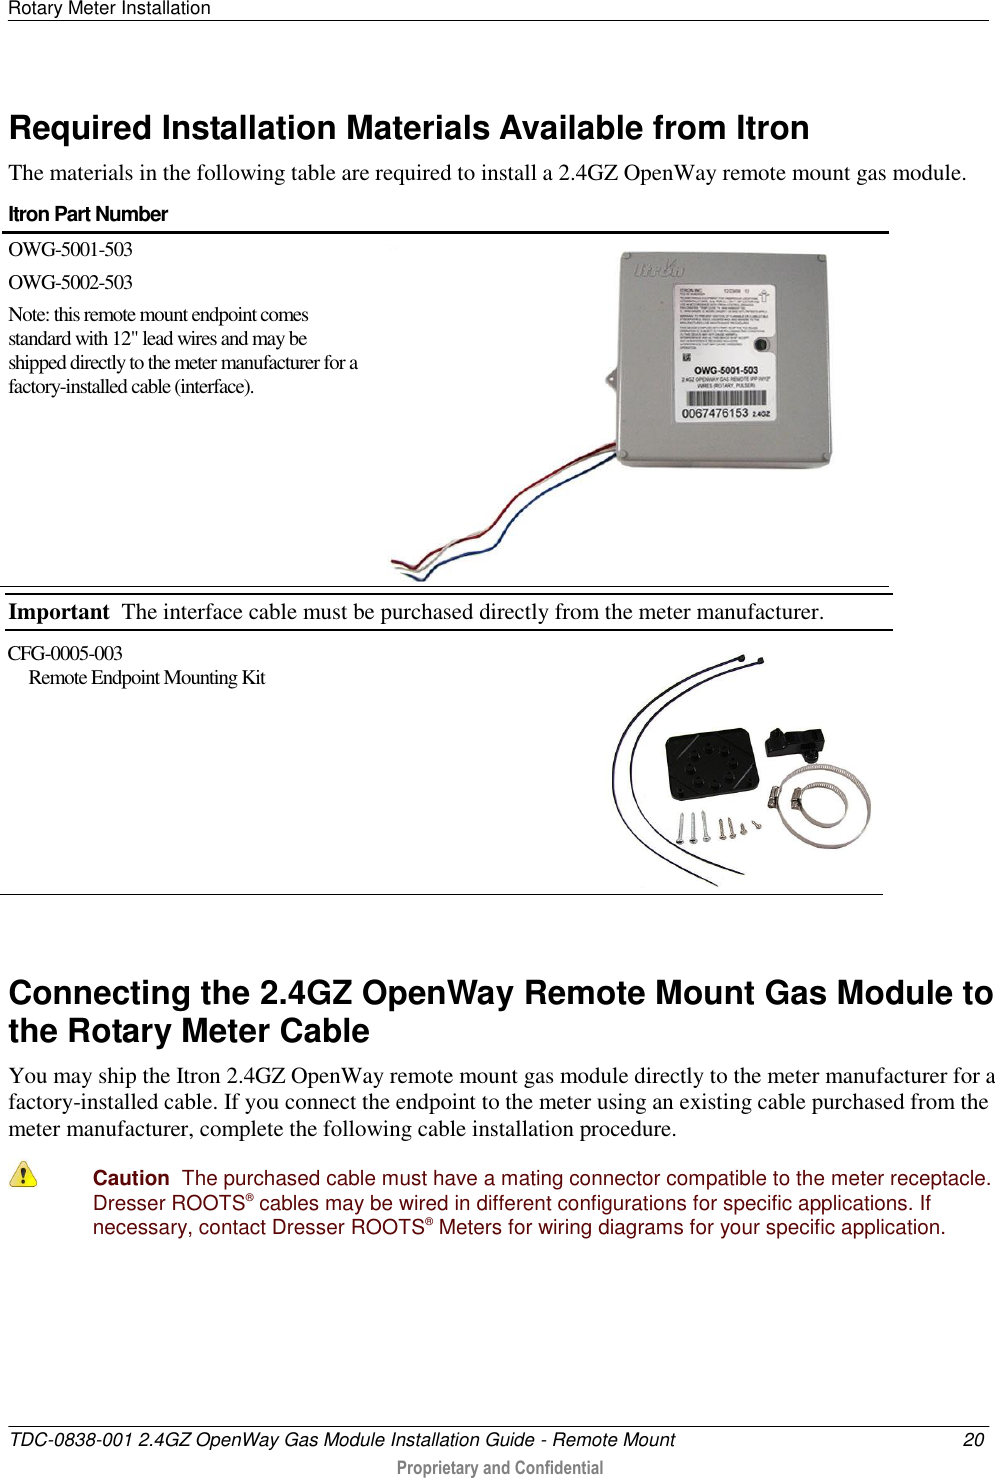 Rotary Meter Installation   TDC-0838-001 2.4GZ OpenWay Gas Module Installation Guide - Remote Mount  20  Proprietary and Confidential    Required Installation Materials Available from Itron The materials in the following table are required to install a 2.4GZ OpenWay remote mount gas module. Itron Part Number  OWG-5001-503 OWG-5002-503 Note: this remote mount endpoint comes standard with 12&quot; lead wires and may be shipped directly to the meter manufacturer for a factory-installed cable (interface).  Important  The interface cable must be purchased directly from the meter manufacturer. CFG-0005-003       Remote Endpoint Mounting Kit    Connecting the 2.4GZ OpenWay Remote Mount Gas Module to the Rotary Meter Cable You may ship the Itron 2.4GZ OpenWay remote mount gas module directly to the meter manufacturer for a factory-installed cable. If you connect the endpoint to the meter using an existing cable purchased from the meter manufacturer, complete the following cable installation procedure.  Caution  The purchased cable must have a mating connector compatible to the meter receptacle. Dresser ROOTS® cables may be wired in different configurations for specific applications. If necessary, contact Dresser ROOTS® Meters for wiring diagrams for your specific application.     